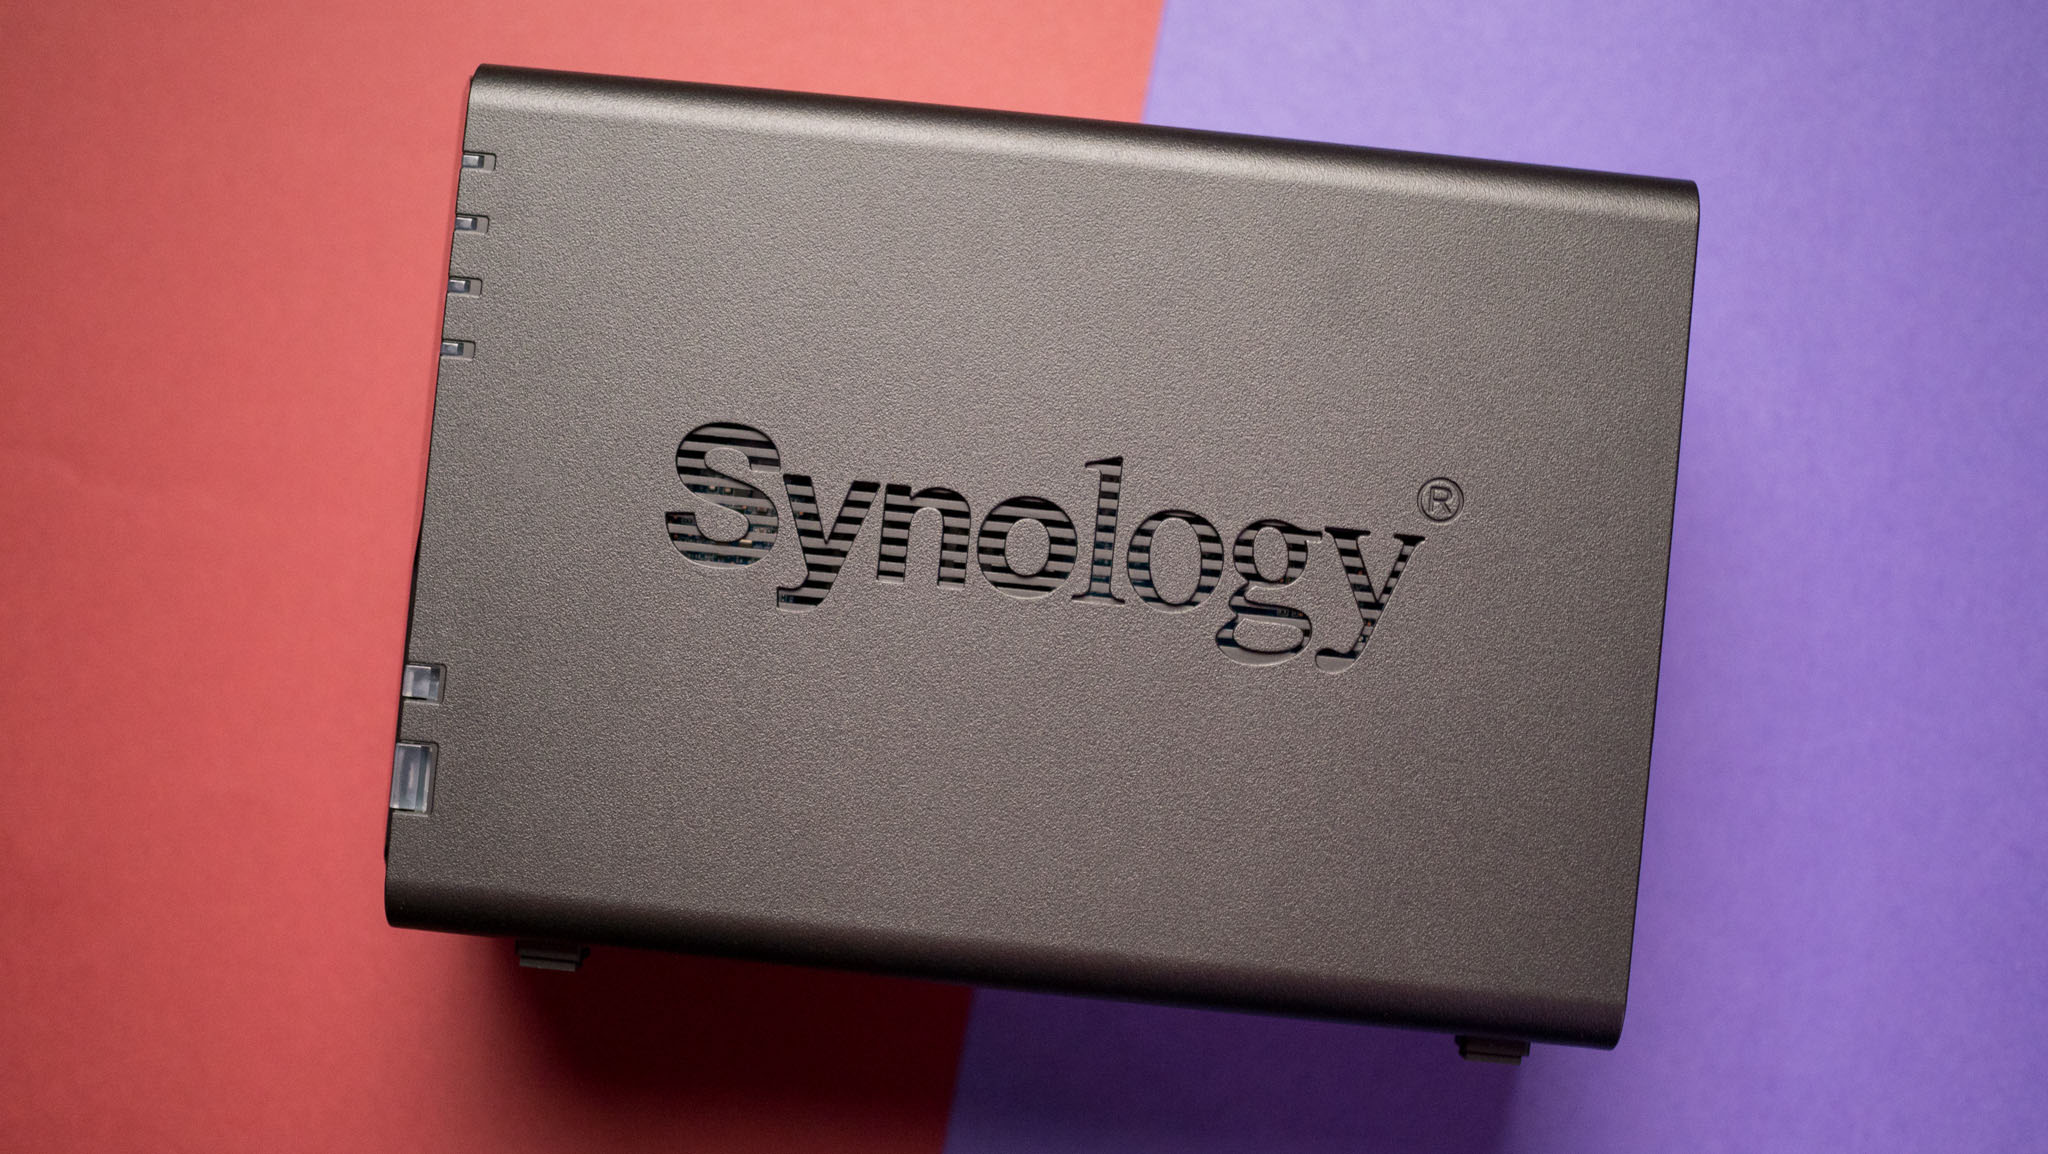 Synology DiskStation DS223 review